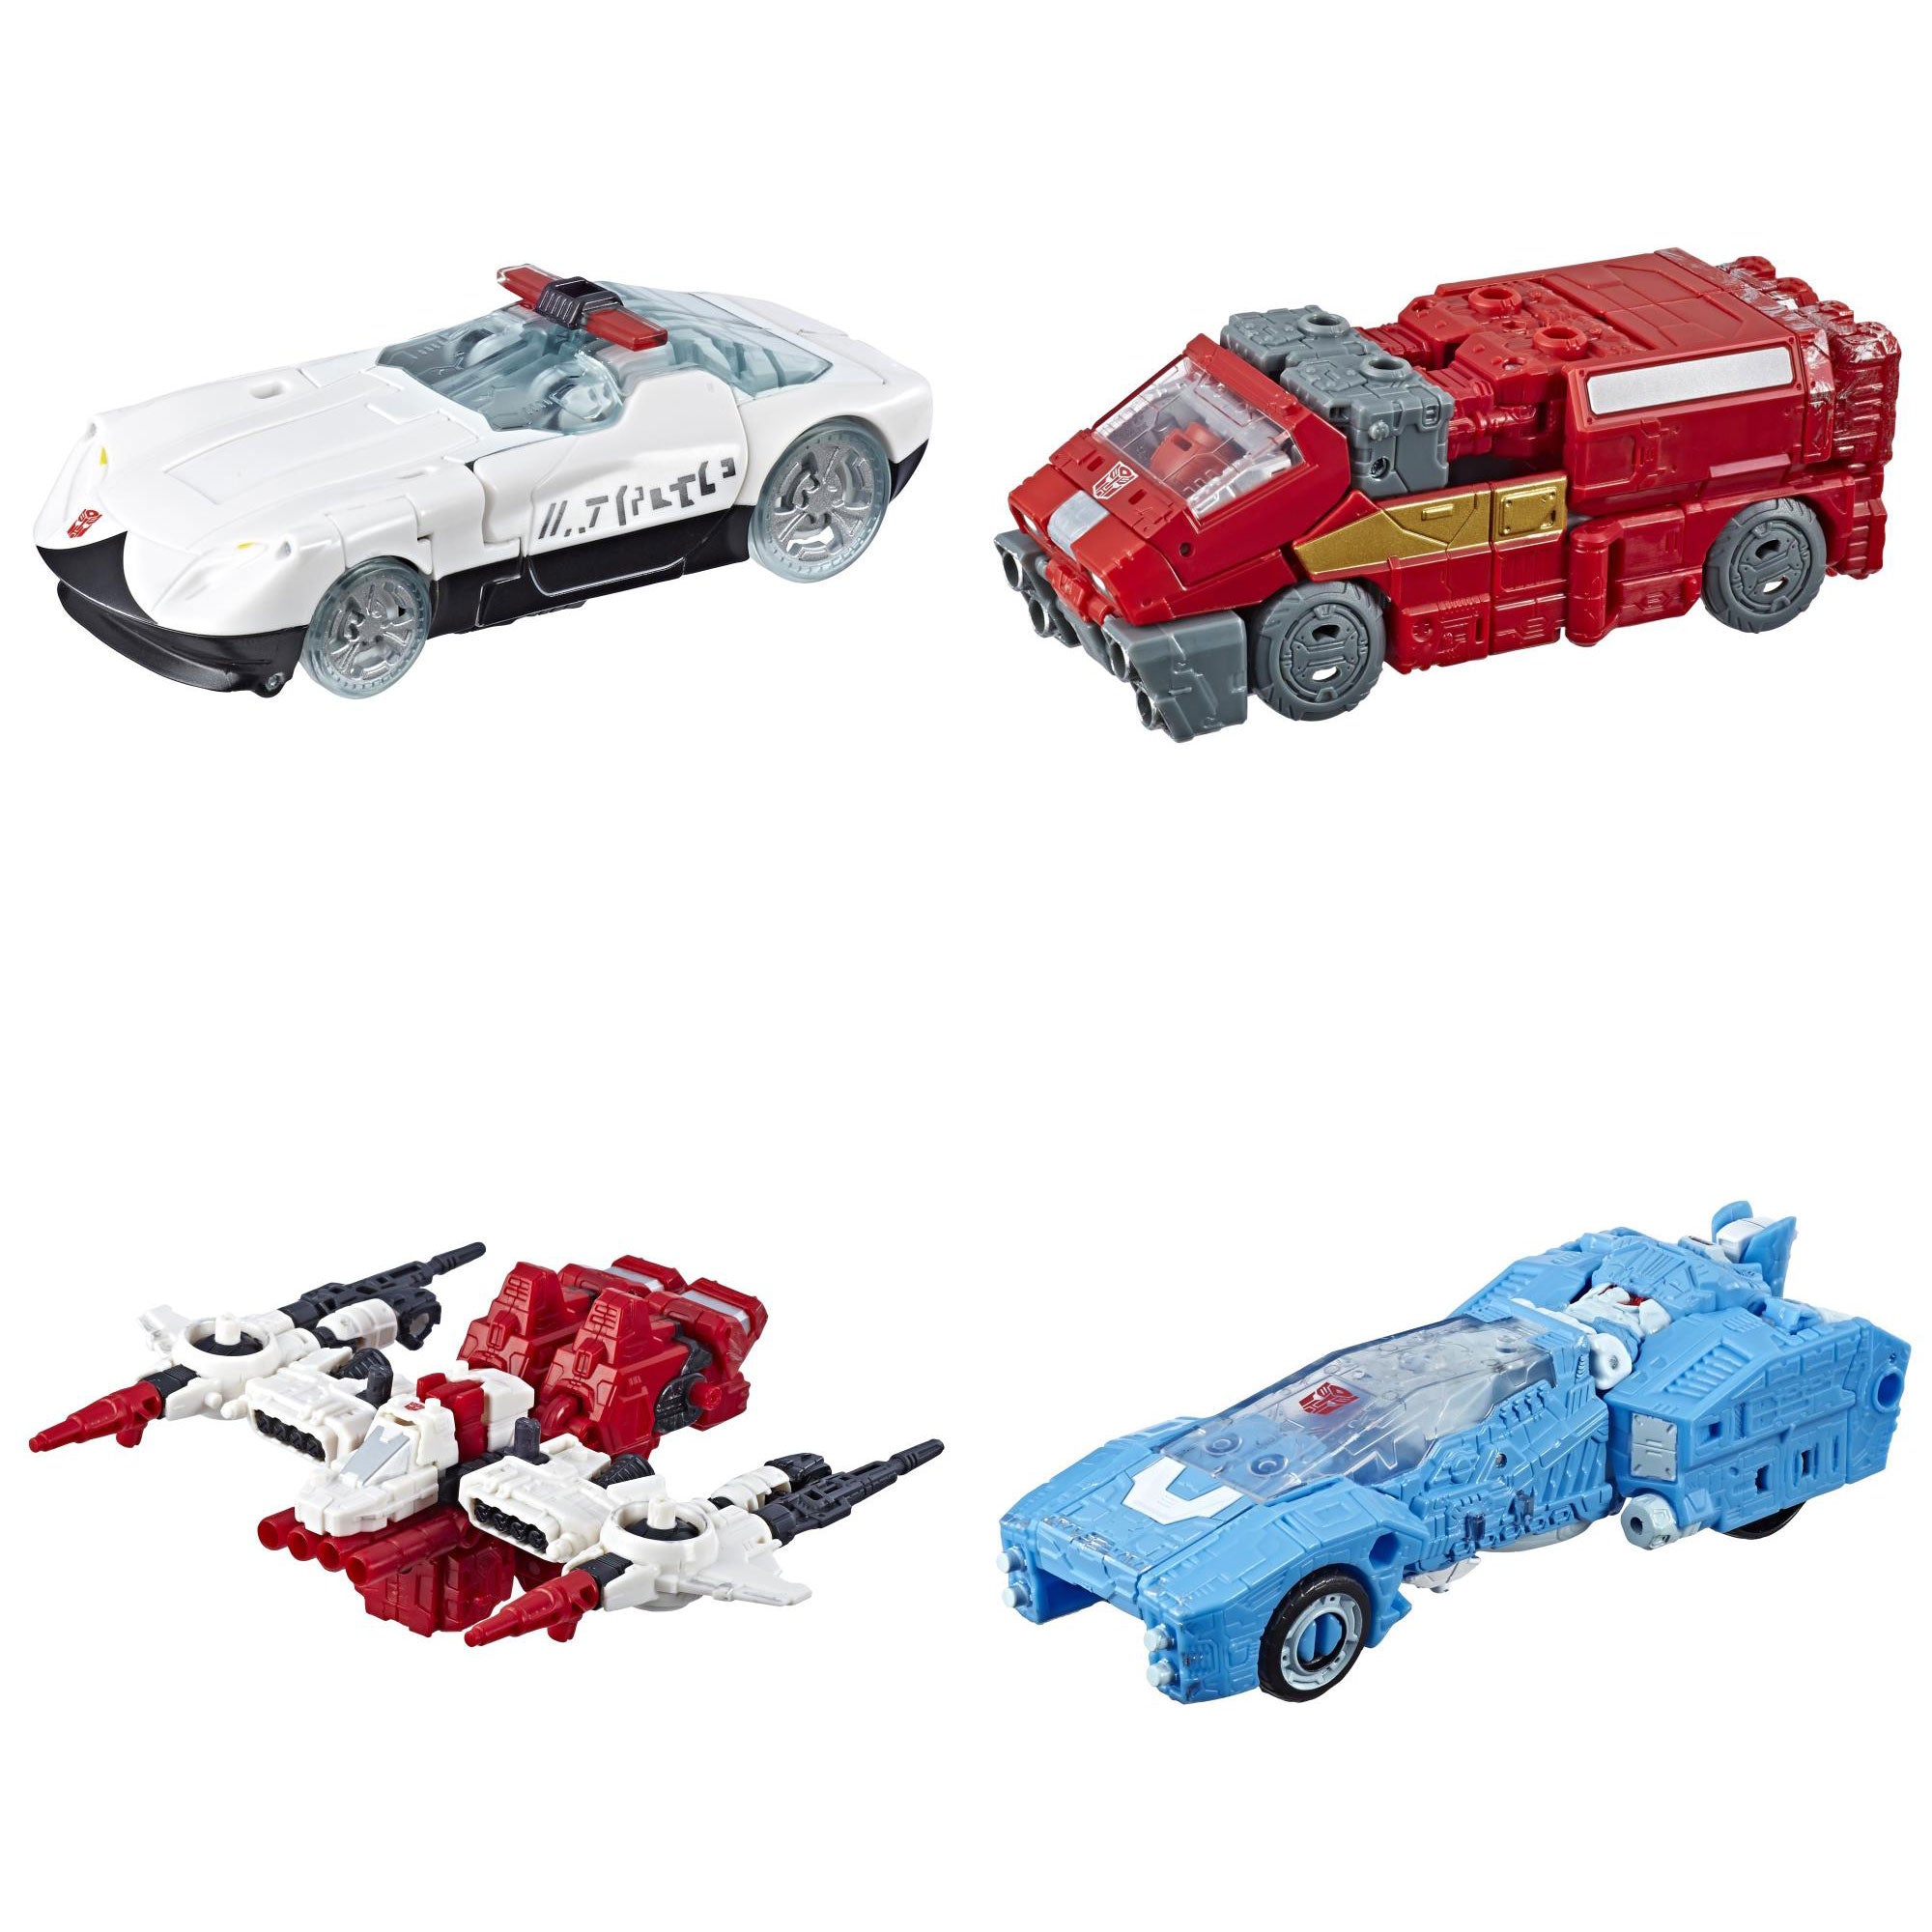 Hasbro - Transformers Generations - War For Cybertron: Siege - Deluxe Wave 2 - Ironhide, Chromia, Prowl, Six-Gun - Marvelous Toys